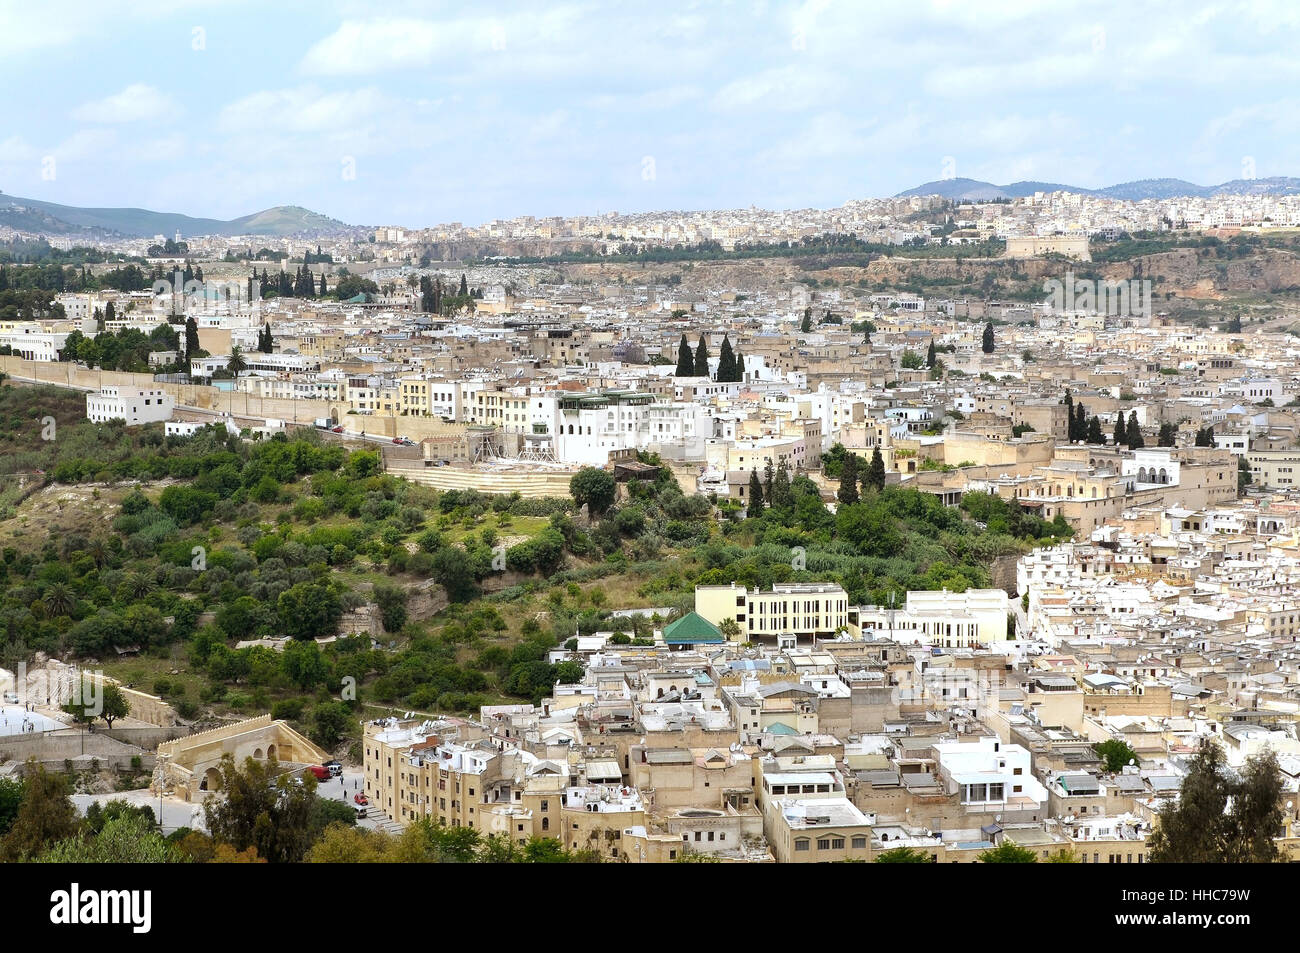 city, town, africa, labyrinth, morocco, islam, historical, city, town, hill, Stock Photo